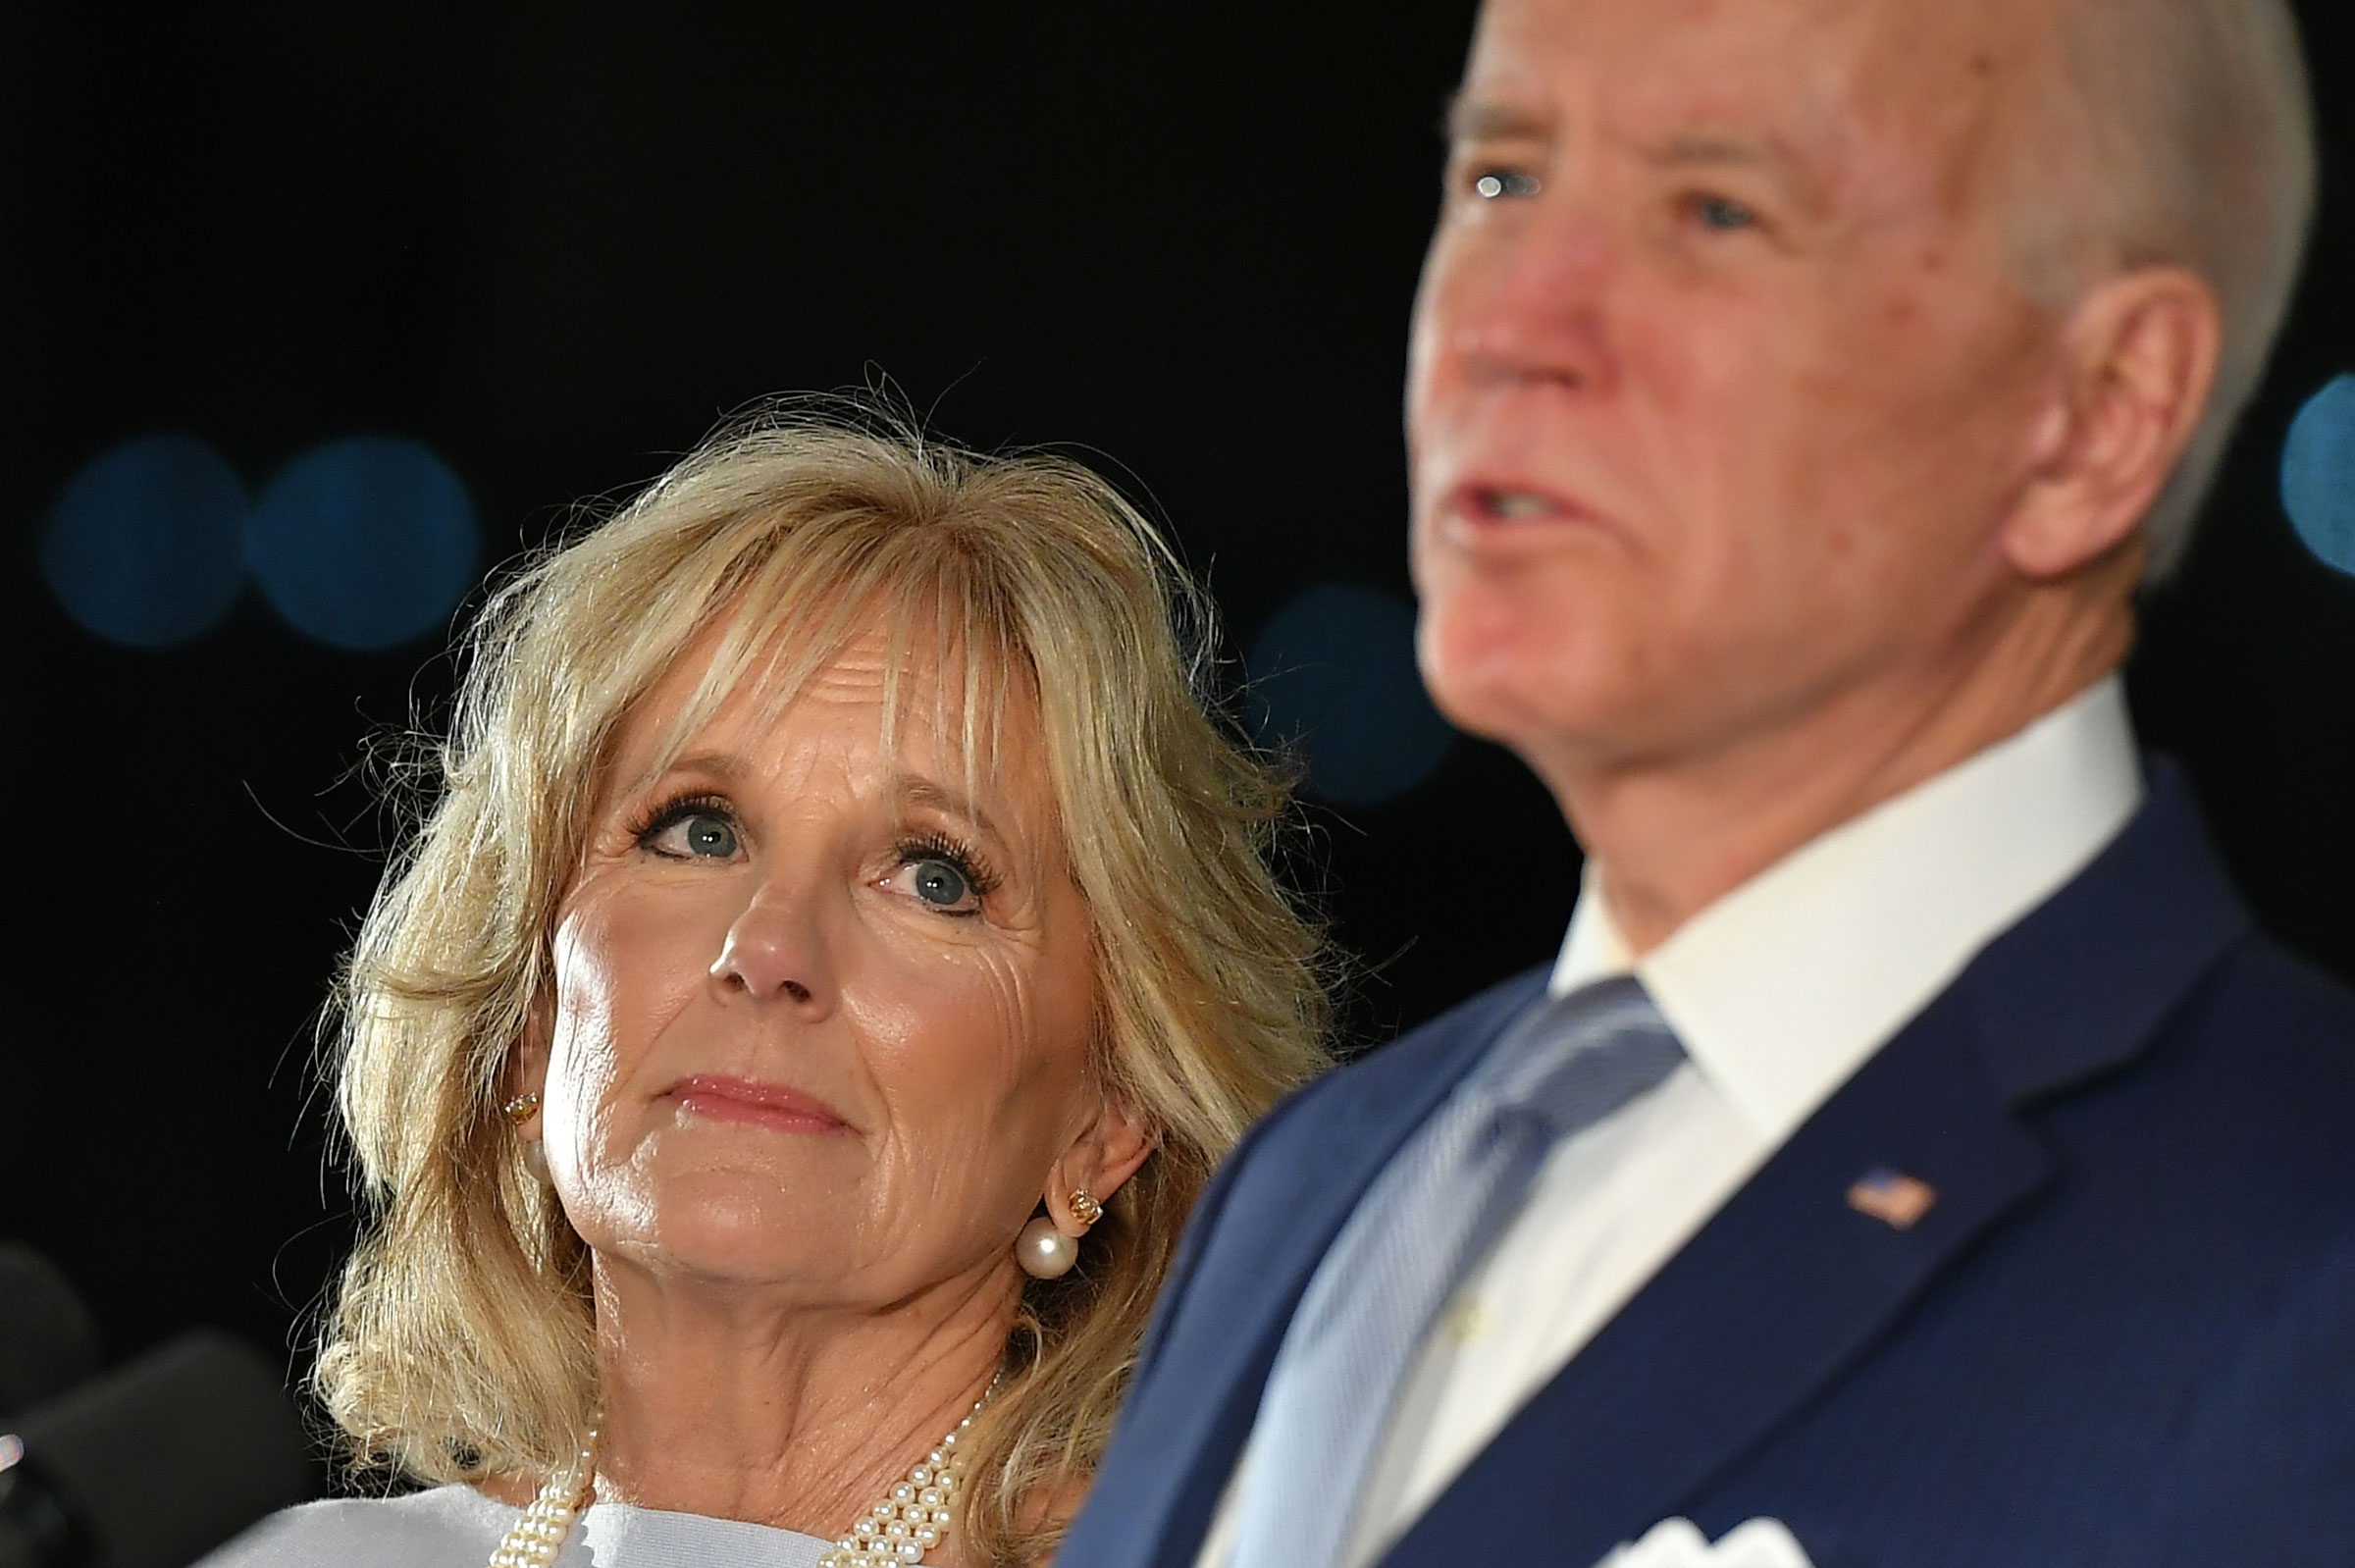 Democratic presidential hopeful former Vice President Joe Biden speaks, flanked by his wife Jill Biden, at the National Constitution Center in Philadelphia, Pennsylvania on March 10, 2020. (Mandel Ngan—AFP/Getty Images)